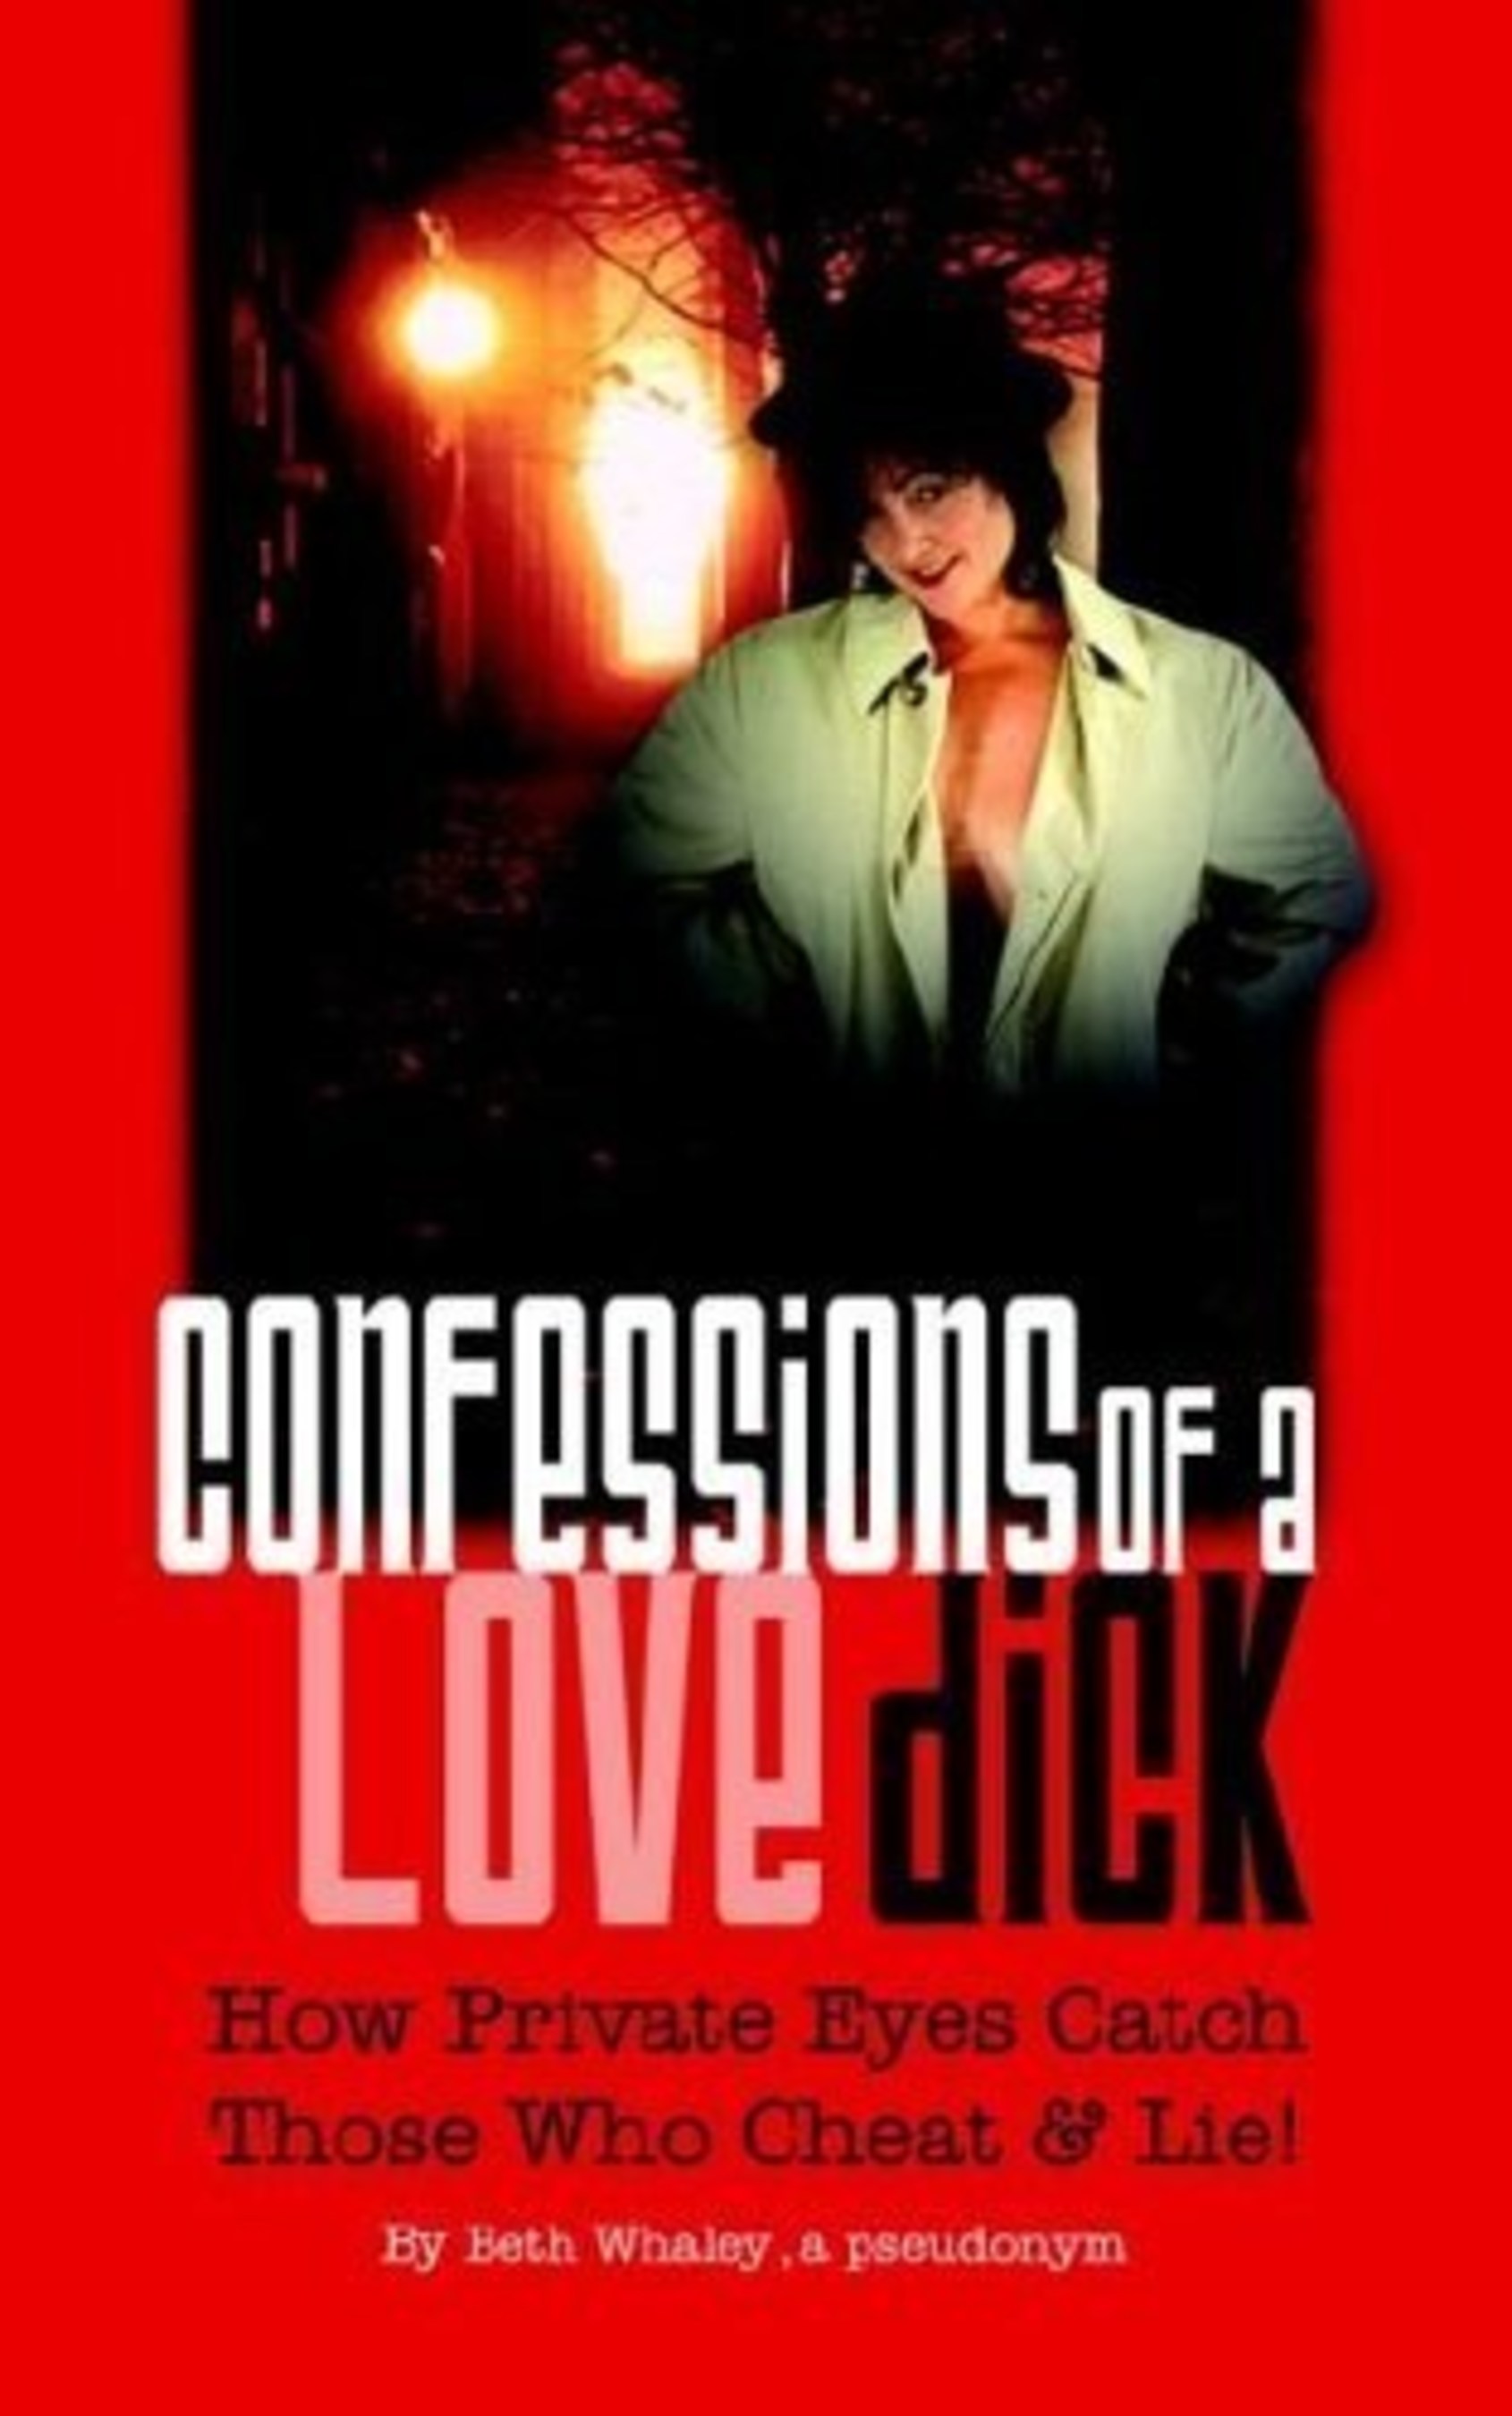 Confessions of a Love Dick- How Private Eyes Catch Those Who Cheat & Lie by Author BethAnne Whaley, is a guide to detecting infidelity. Her 2nd book reveals more about 2 intertwining sex industries- the Massage (body rub) & Call Girl biz. How hook ups are arranged became the content for her 2nd book with a catchy title: Confessions of a Backpage Masseuse Cum Courtesan which launches, you guessed it, Valentine's Day 2015. Advance .pdf copies are available for $10 by emailing lovedick4hire@aol.com or calling 865-209-0689. Reasonable, considering a happy ending or "Girl Friend Experience" costs 10X that.